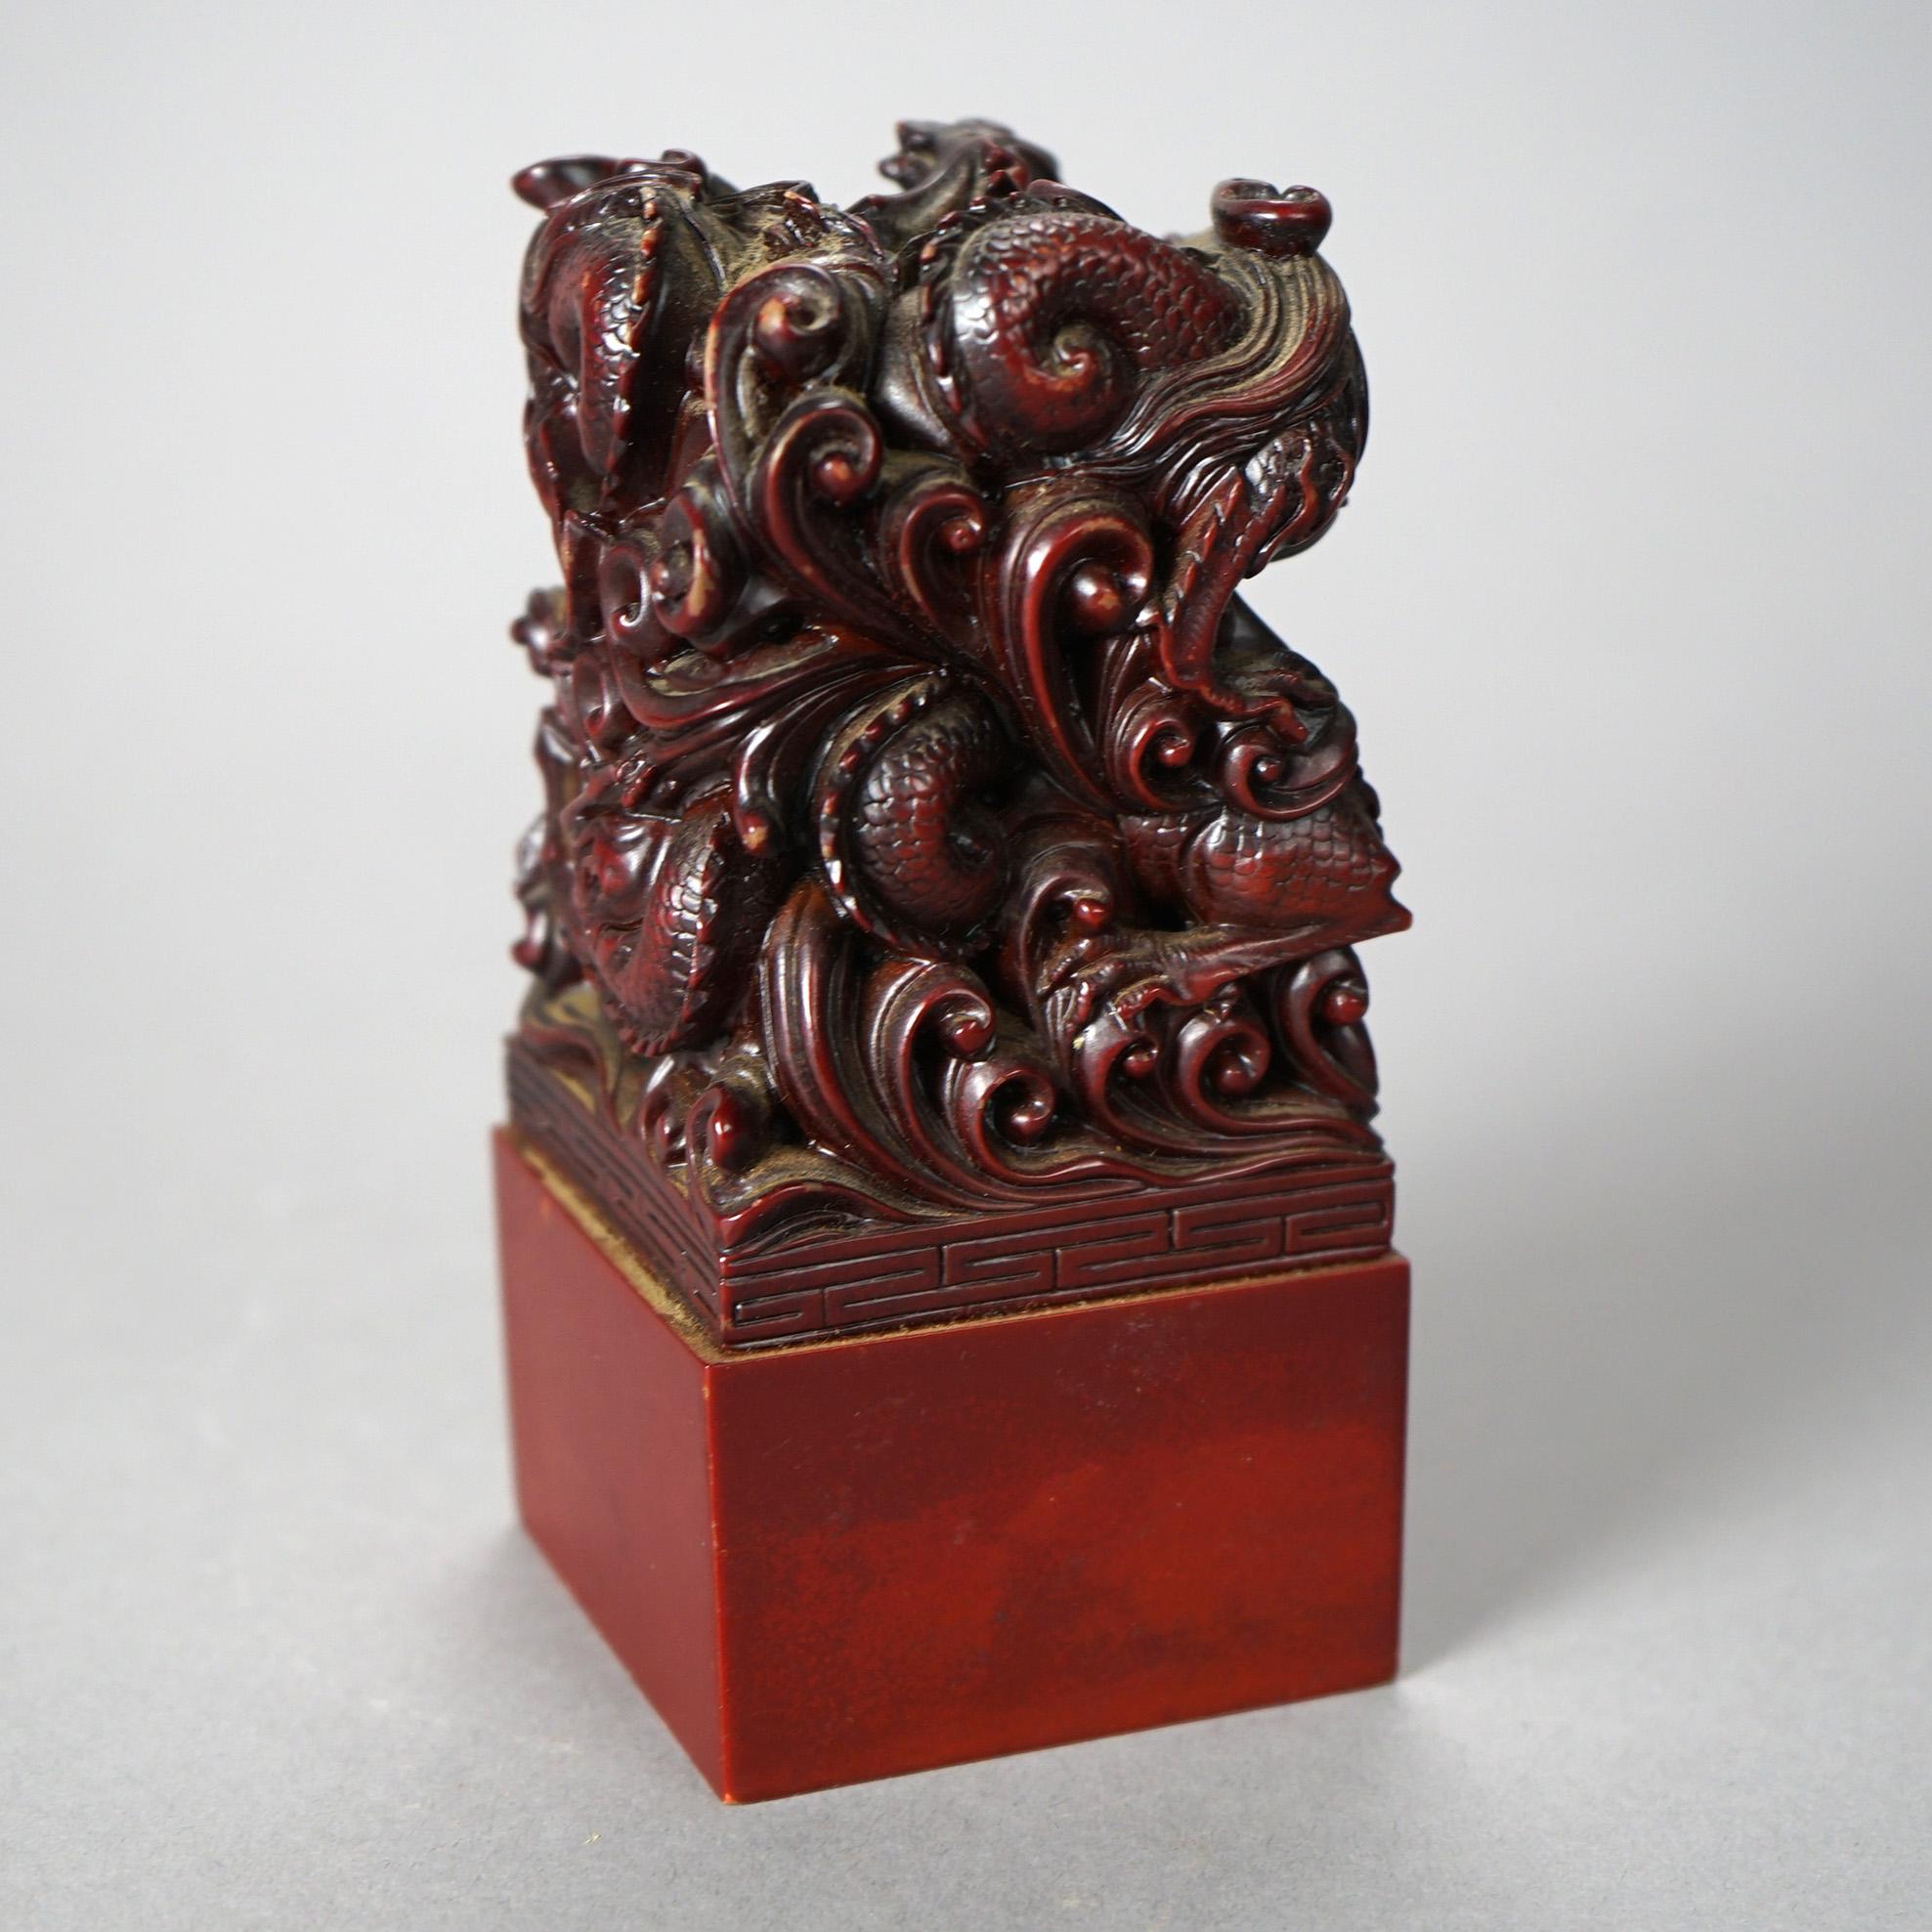 Antique Chinese Carved Hardwood Figural Group with Dragons, circa 1920 For Sale 3